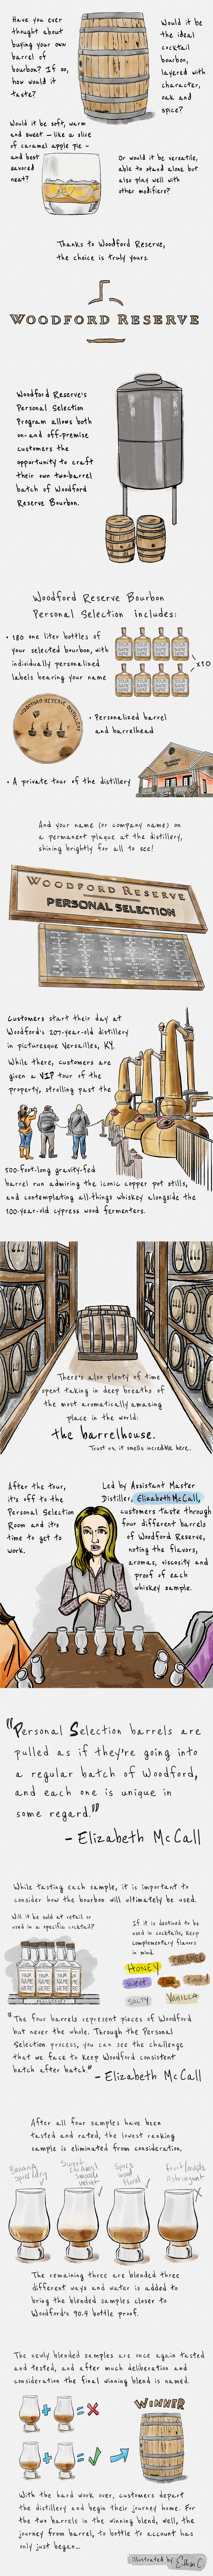 Woodford Reserve Personal Selection: The Illustrated Guide